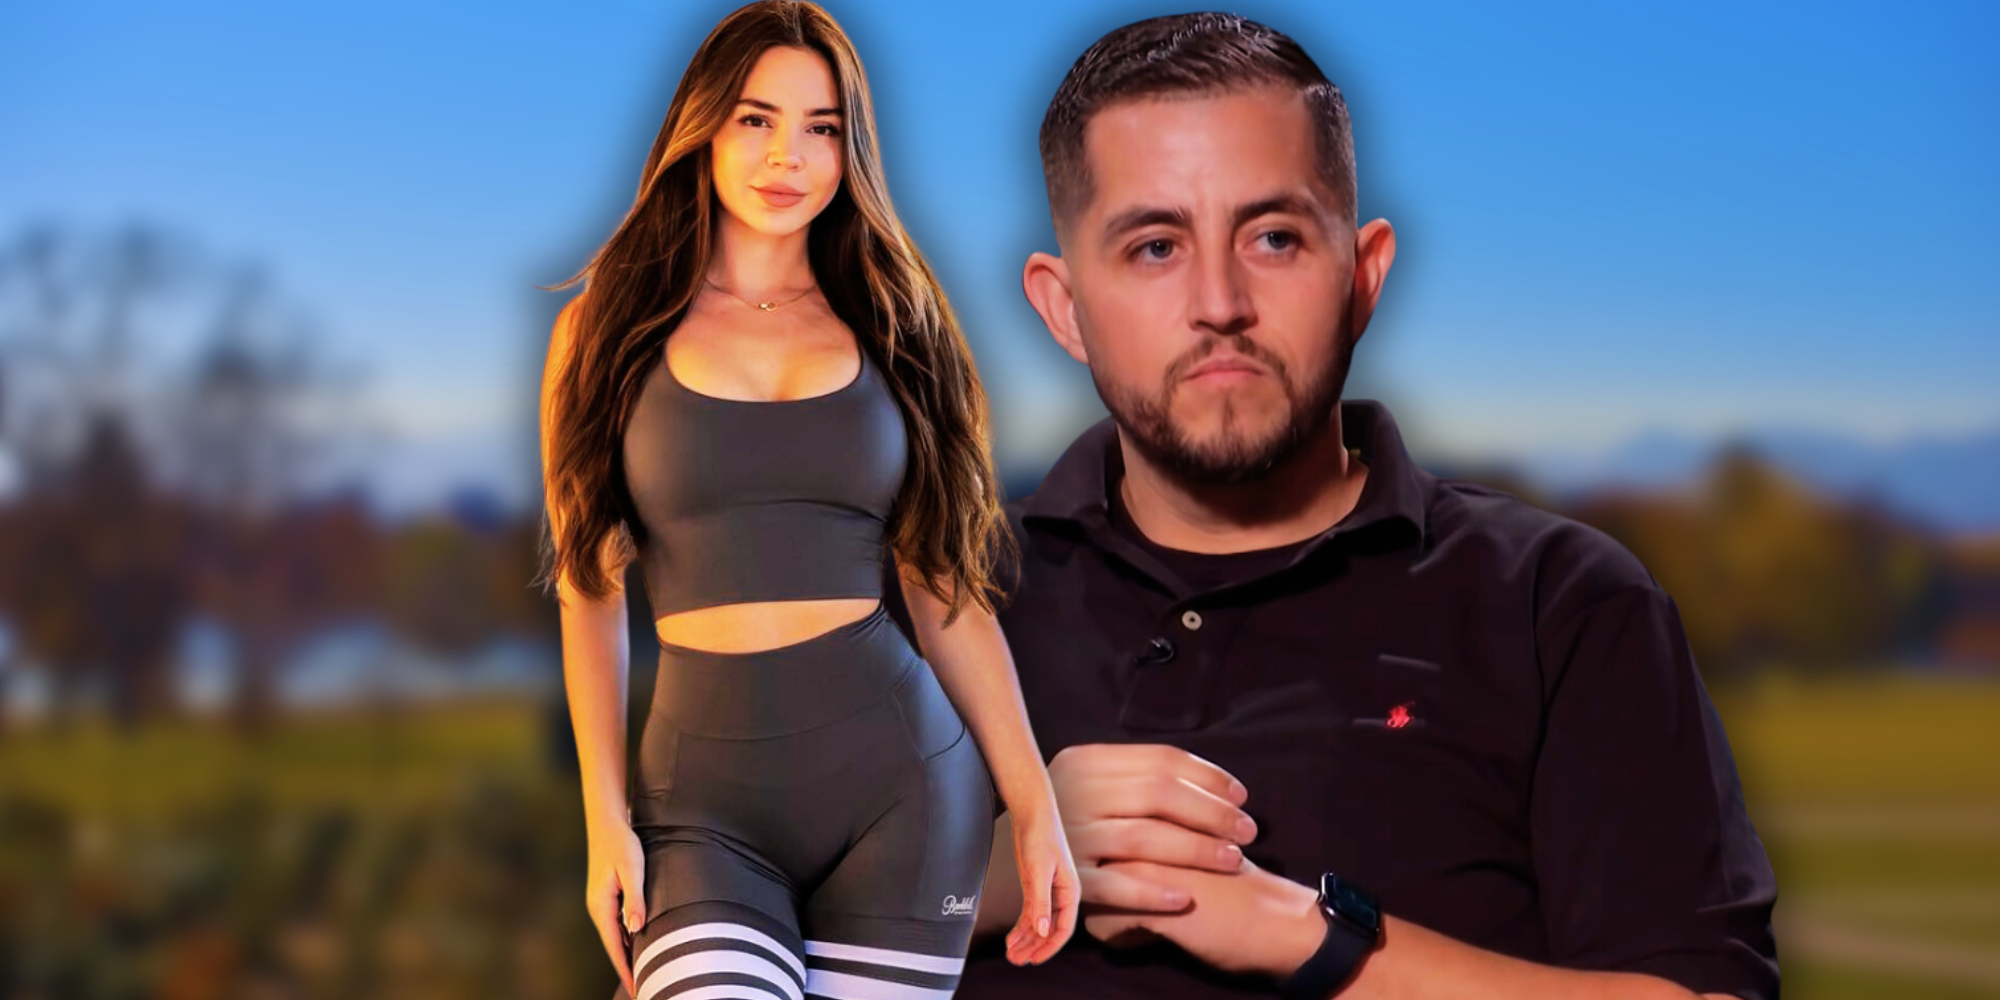 Jorge Nava and Anfisa Arkhipchenko from 90 Day Fiancé montage with outdoor background